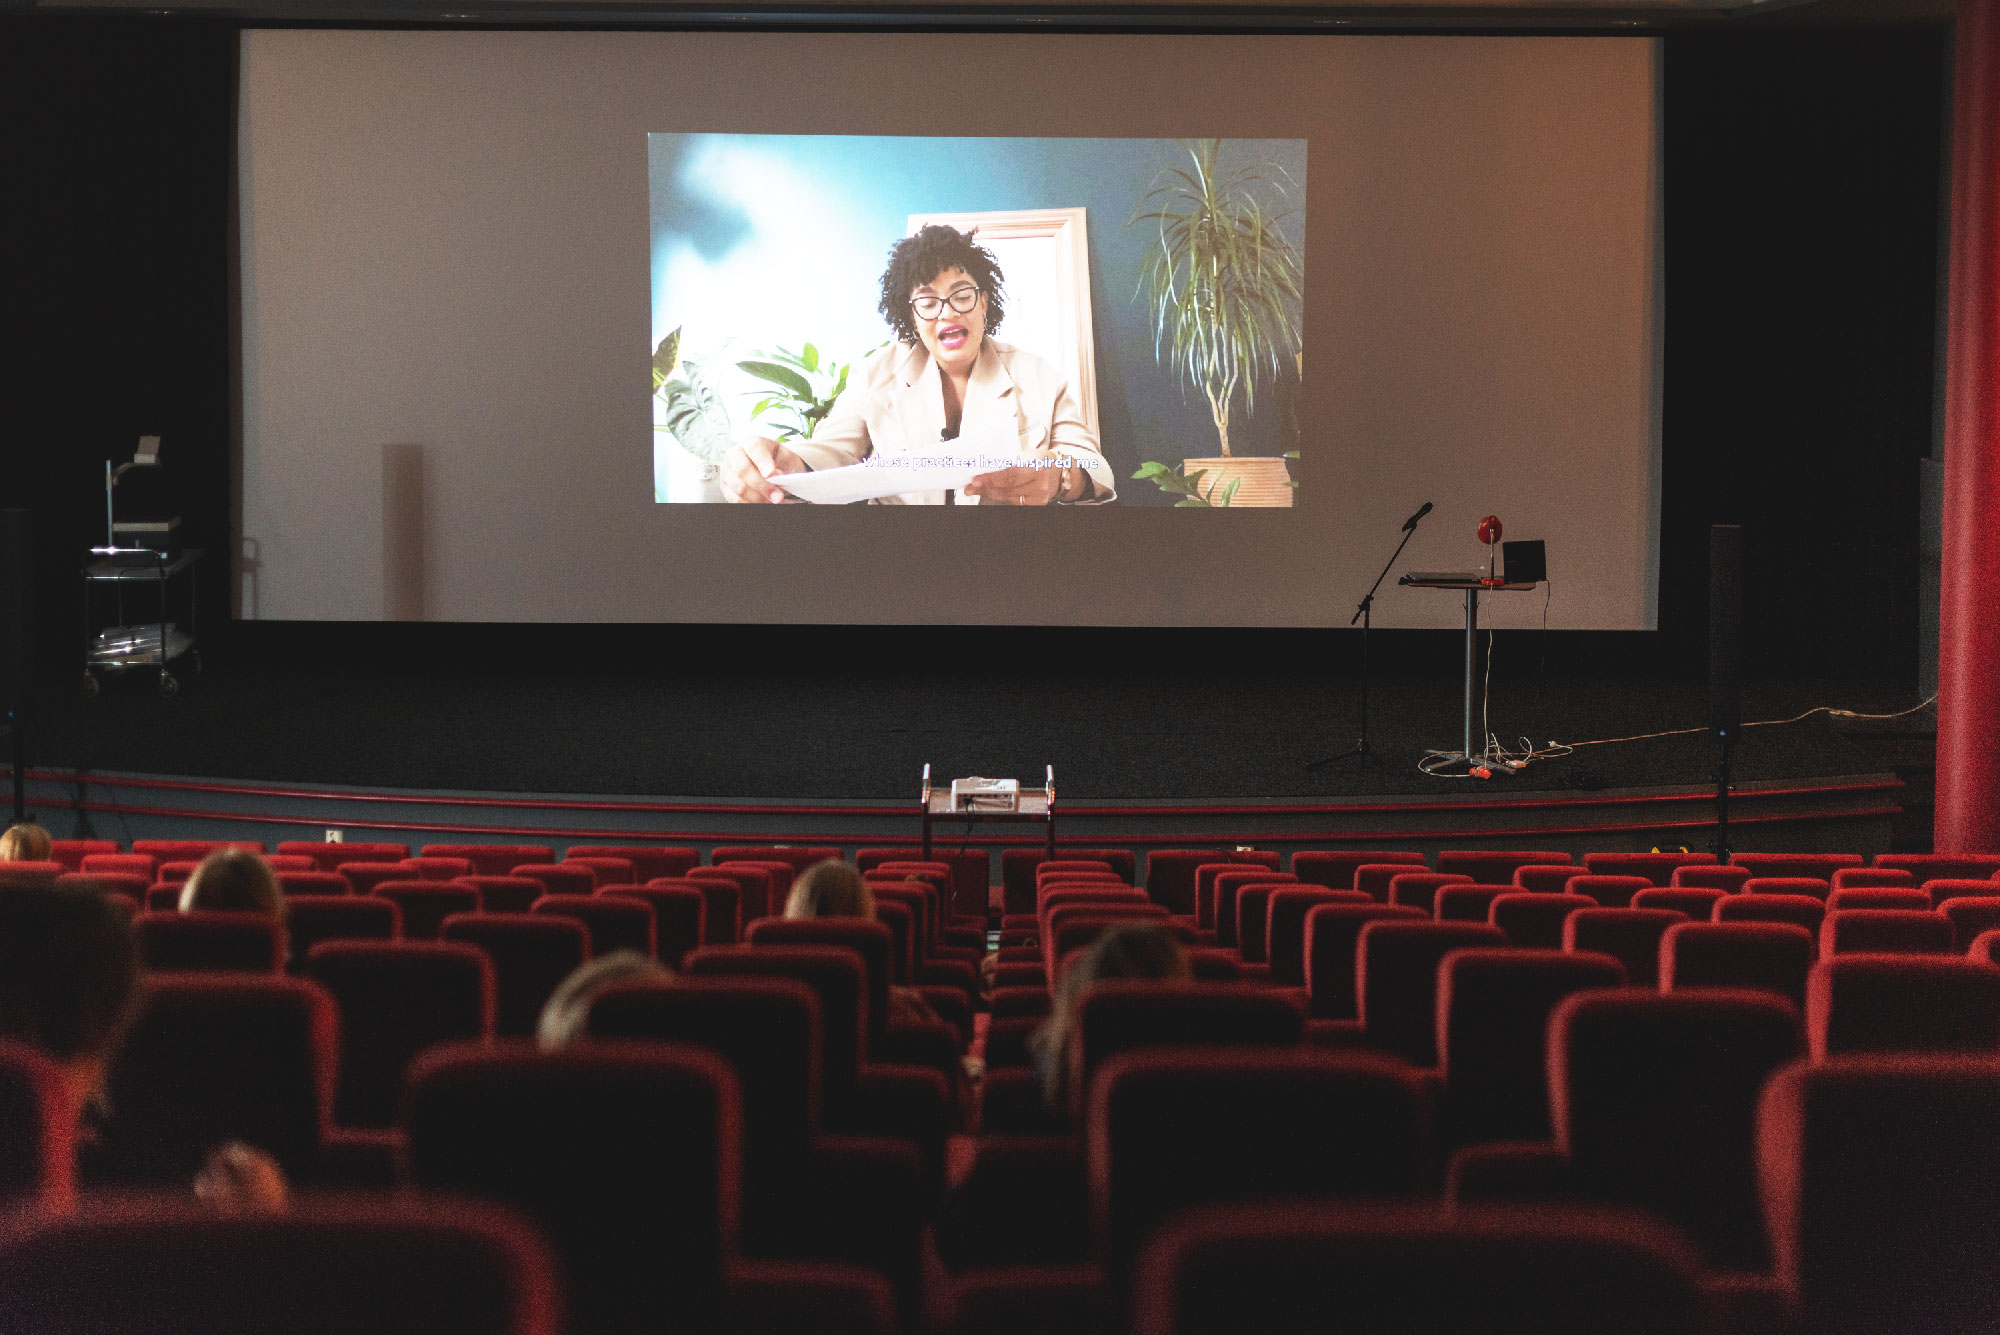 An auditorium with a large screen and rows of mostly empty red velvet seats. On the screen is a video of Ama Josephine Budge's performance. Ama, a black-skinned person with dark hair and thick framed glasses, is sitting in a room with plants and is reading from a sheet of paper.